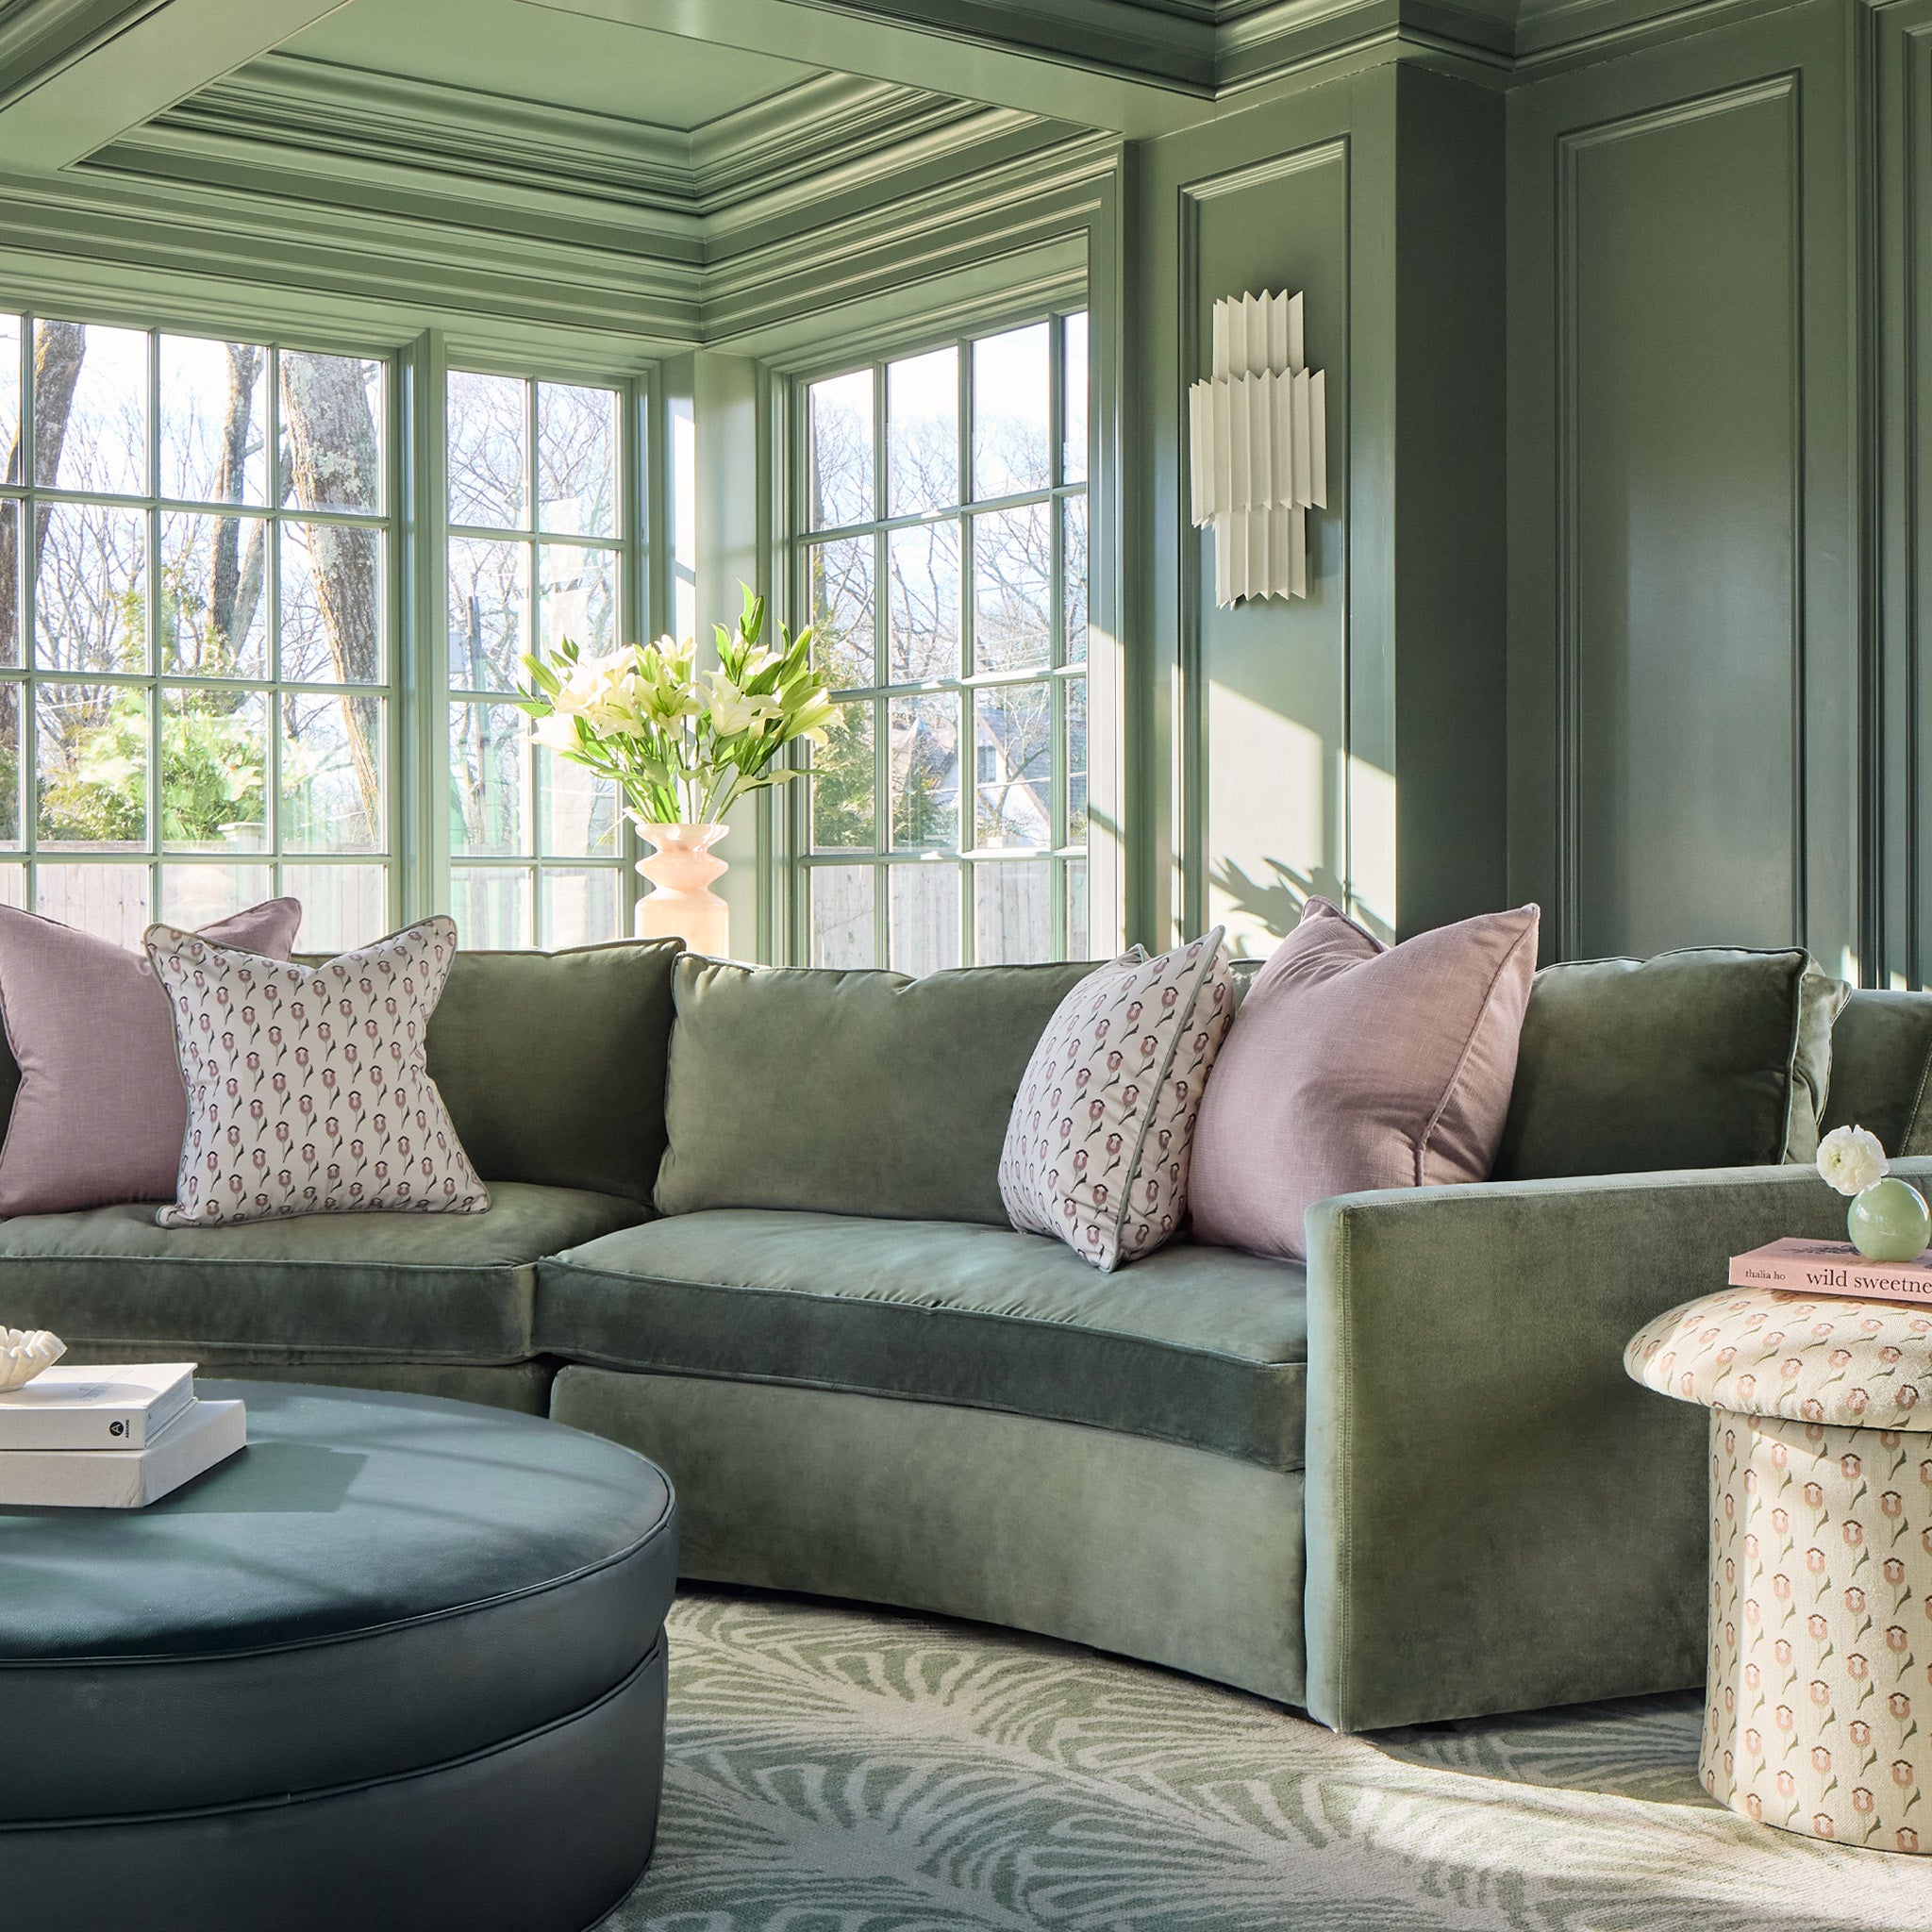 soft pink pillows on a green couch with floral pillows and a blue ottoman stacked with books in a room with green walls